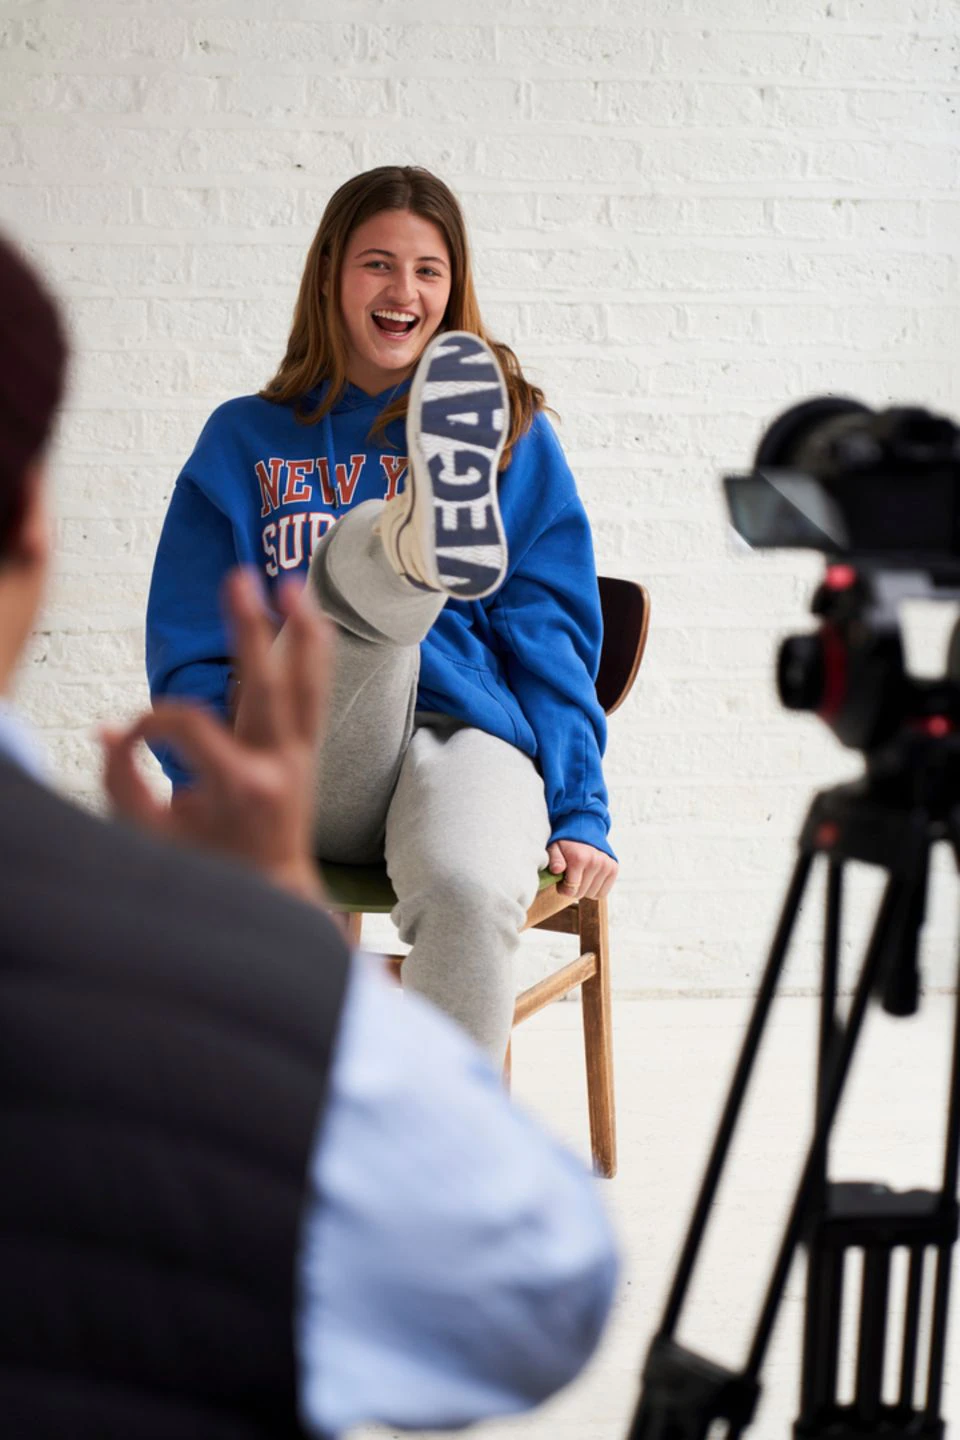 Emma Schweiger clearly has fun during the shoot. 